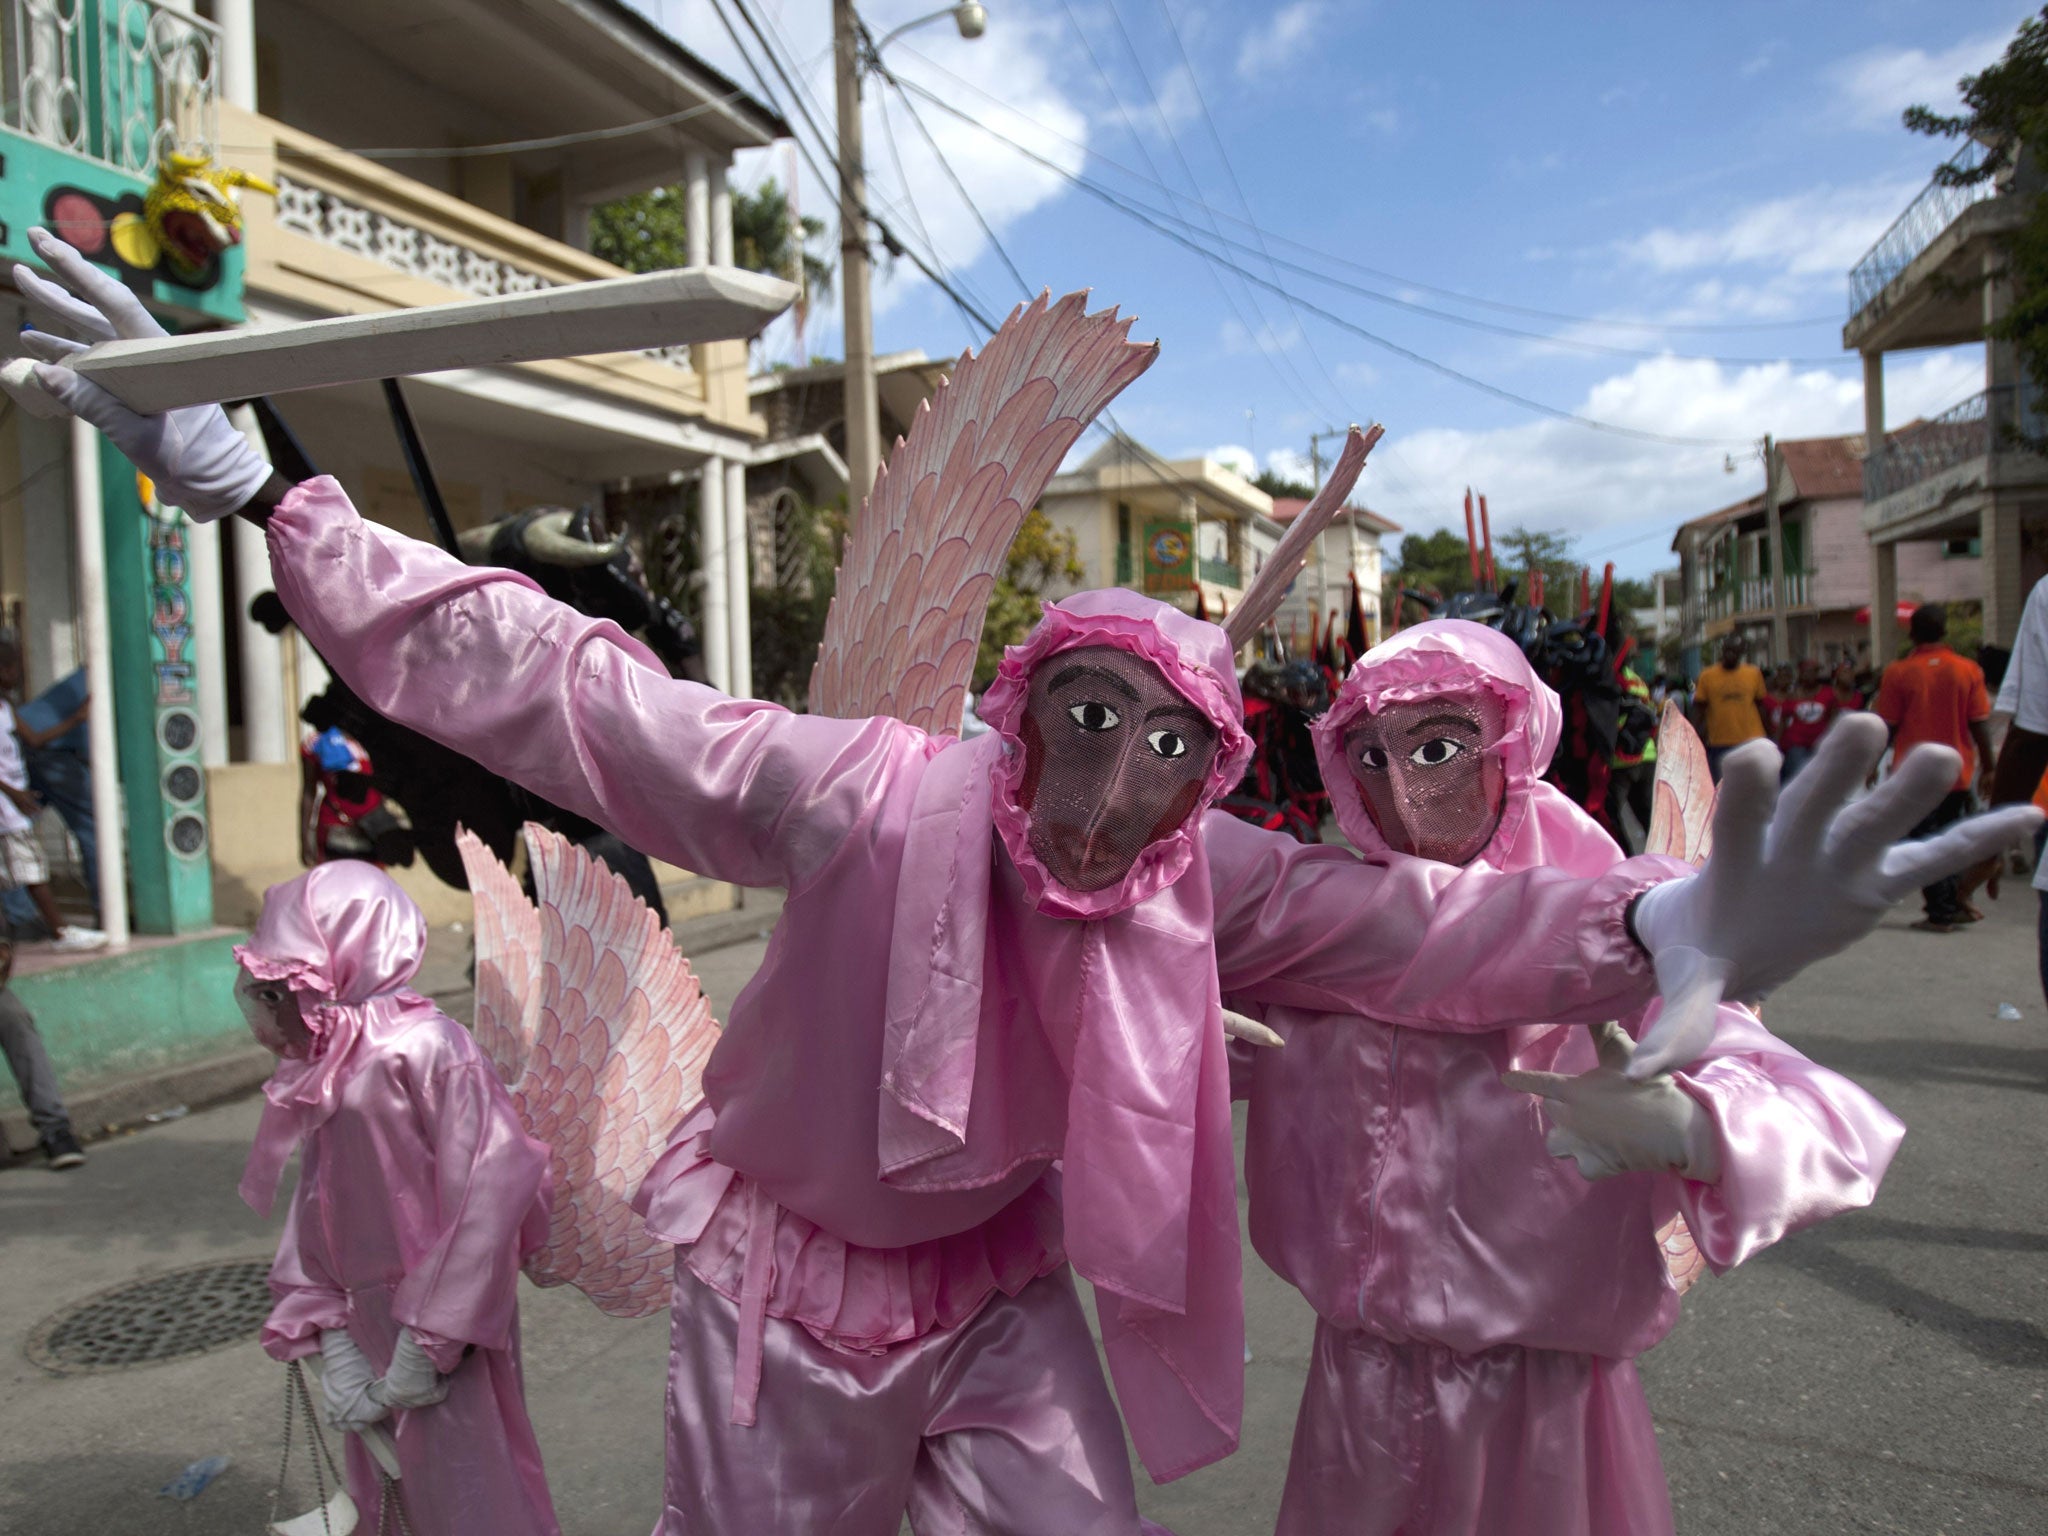 Revelers dressed as Archangel St. Michael dance during Carnival celebrations in Jacmel. The Carnival spirit took hold as Jacmel's annual parade snaked through the downtown of this coastal town revered among Haitians for its artists and artisans